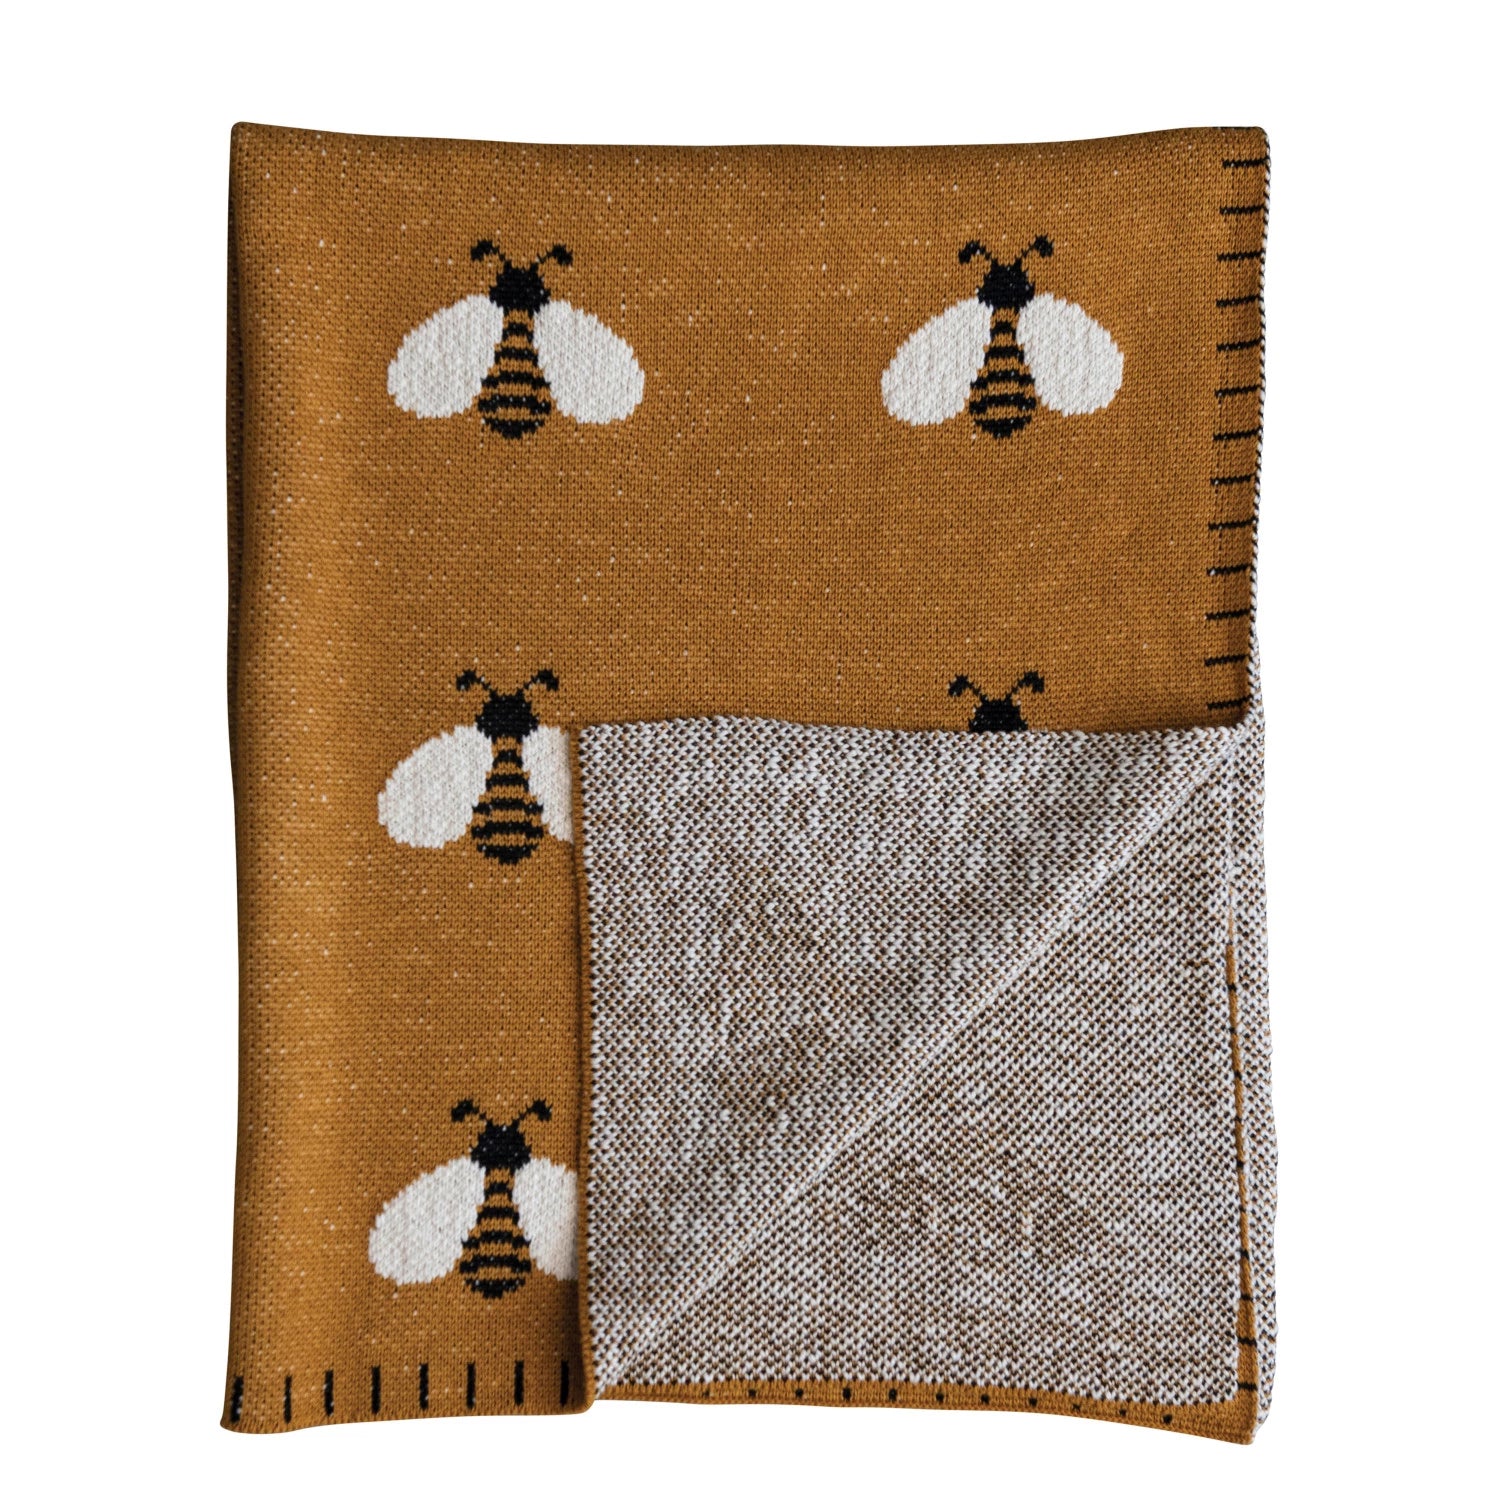 Cotton Knit Baby Blanket w/ Bees & Blanket Stitch, Multi Color